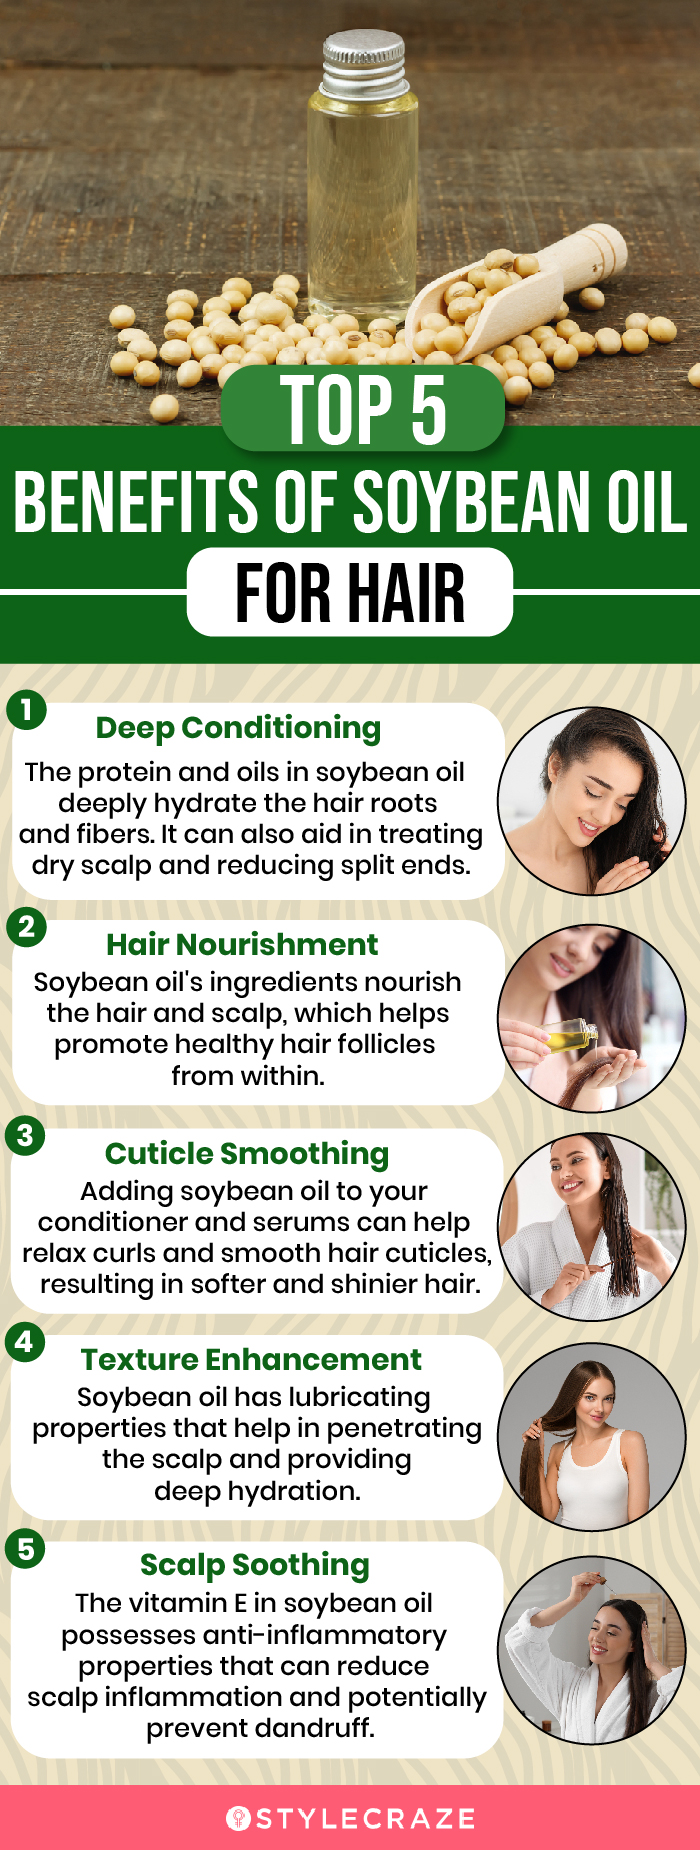 top 5 benefits of soybean oil for hair (infographic)